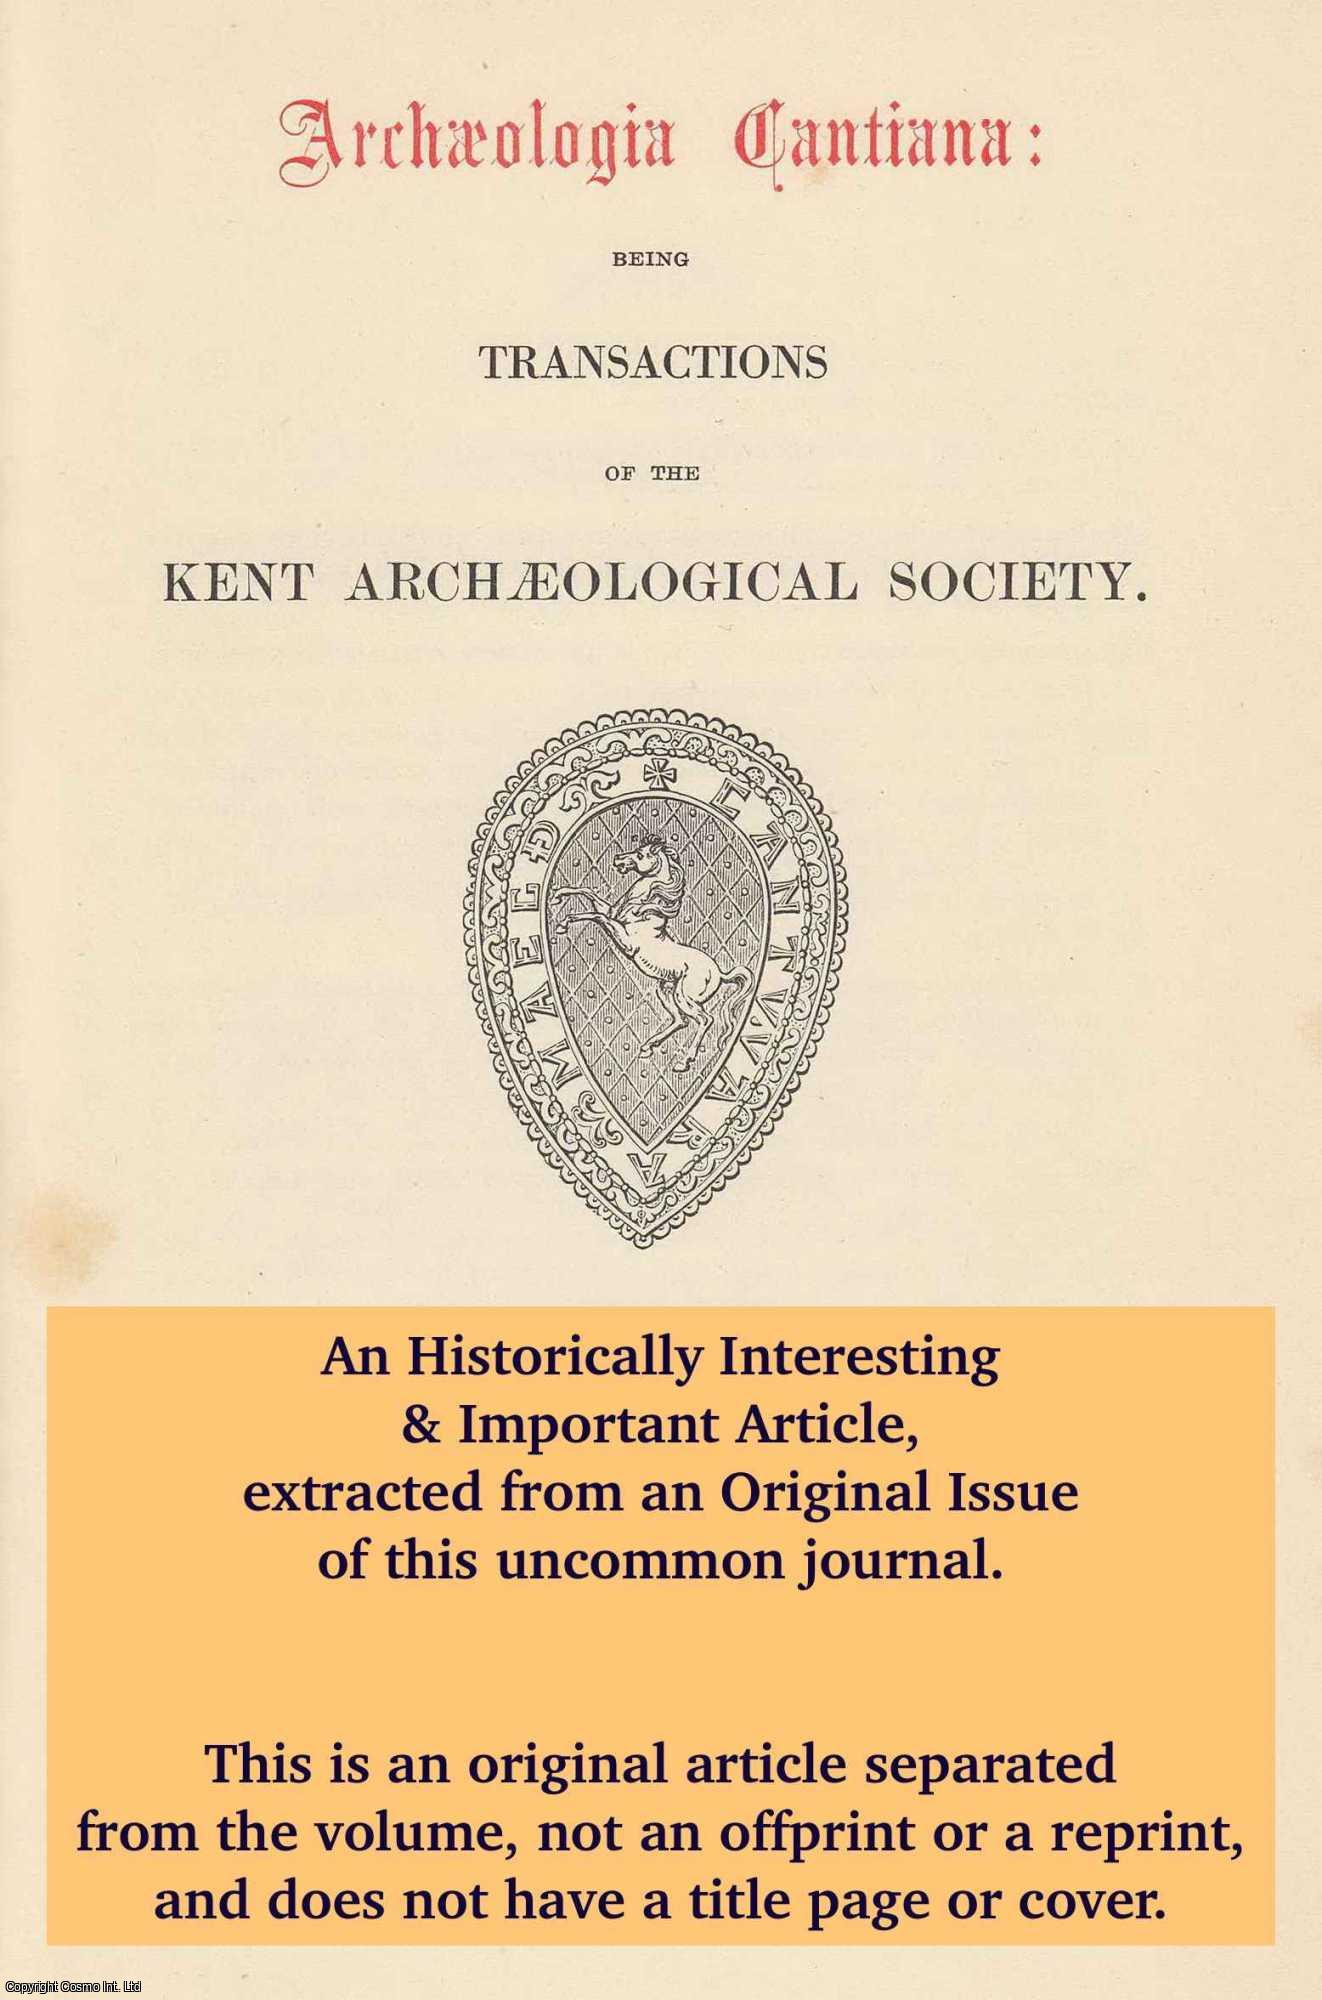 Ian Riddler - Combs with Perforated Handles. An original article from The Archaeologia Cantiana: Transactions of The Kent Archaeological Society, 1997.